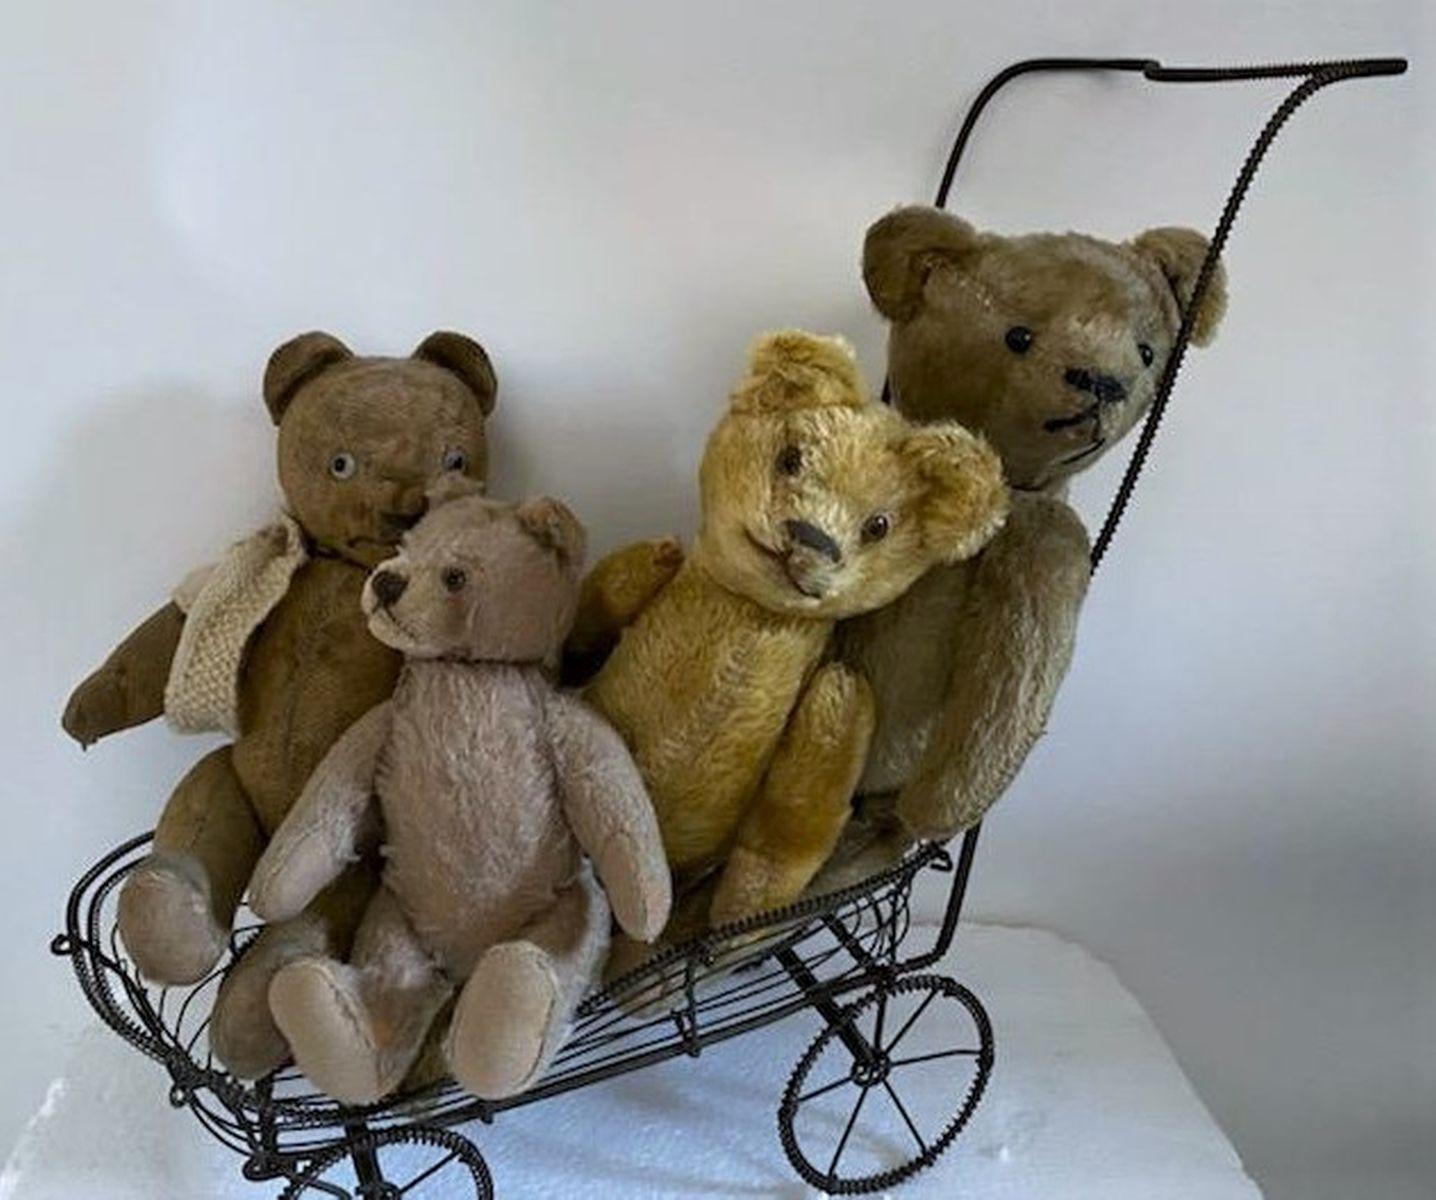 Group of four vintage jointed bears with glass eyes. Great collection of bears in good condition.

Largest bear measures 14 high x 5 wide
Smallest bear measures 9 high x 4 wide.